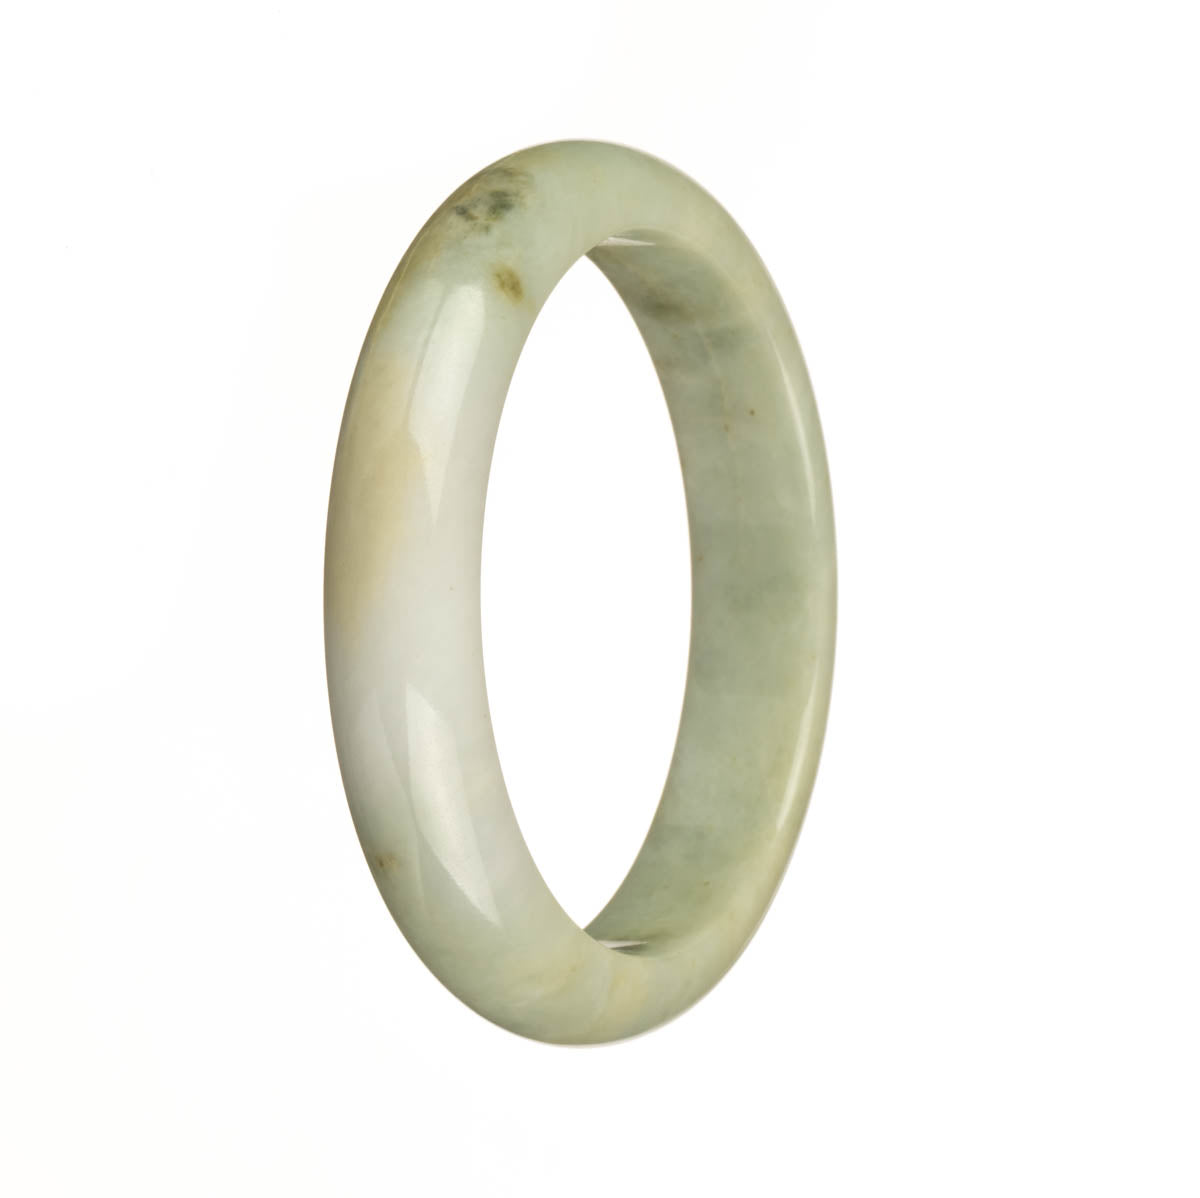 A close-up photo of a bracelet made of pale green and white jadeite jade. The bracelet features yellow patches throughout and has a half-moon shape, with a diameter of 57mm. This bracelet is untreated and boasts an authentic design. Created by MAYS™.